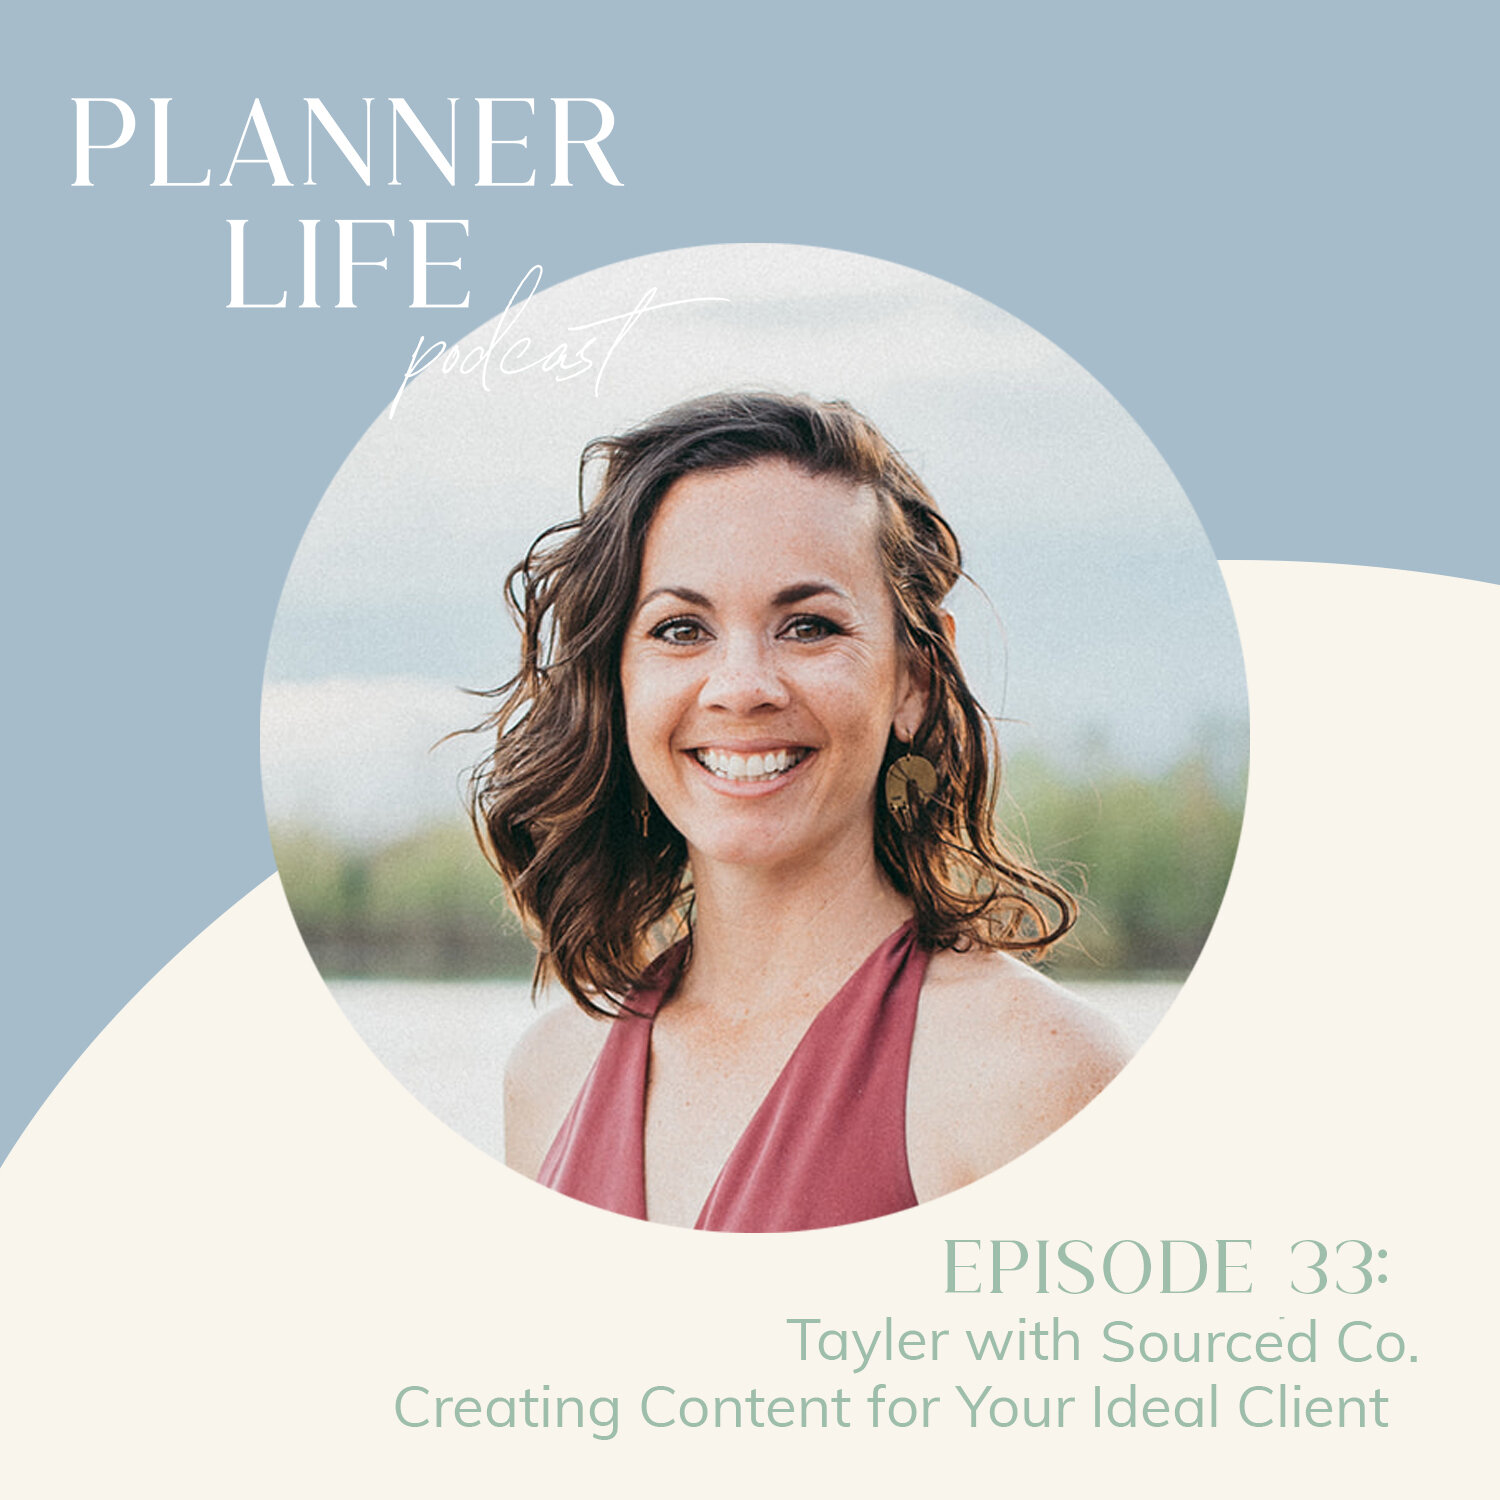 planner-life-podcast-episode-graphic-33 copy.jpg